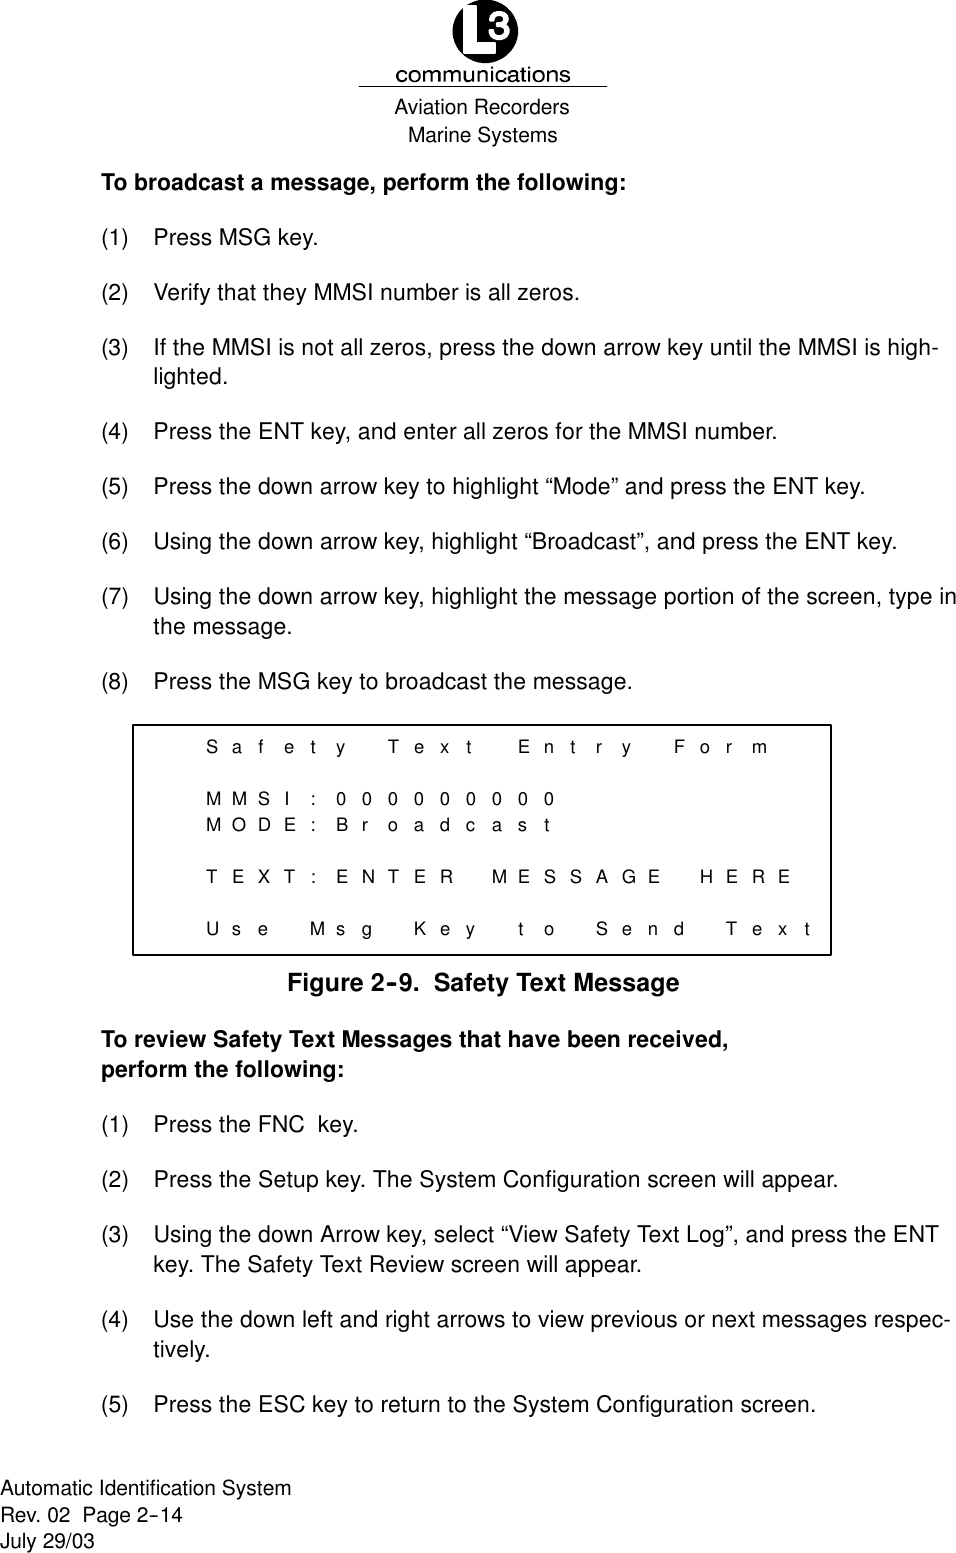 Marine SystemsAviation RecordersRev. 02 Page 2--14July 29/03Automatic Identification SystemTo broadcast a message, perform the following:(1) Press MSG key.(2) Verify that they MMSI number is all zeros.(3) If the MMSI is not all zeros, press the down arrow key until the MMSI is high-lighted.(4) Press the ENT key, and enter all zeros for the MMSI number.(5) Press the down arrow key to highlight “Mode” and press the ENT key.(6) Using the down arrow key, highlight “Broadcast”, and press the ENT key.(7) Using the down arrow key, highlight the message portion of the screen, type inthe message.(8) Press the MSG key to broadcast the message.SaMMMOTEUsfetySIDE:0:BT: EXeMsTex00ro00adNTERgKet0cyEnt00as0tMESStory FAGESendor mHERETex tFigure 2--9. Safety Text MessageTo review Safety Text Messages that have been received,perform the following:(1) Press the FNC key.(2) Press the Setup key. The System Configuration screen will appear.(3) Using the down Arrow key, select “View Safety Text Log”, and press the ENTkey. The Safety Text Review screen will appear.(4) Use the down left and right arrows to view previous or next messages respec-tively.(5) Press the ESC key to return to the System Configuration screen.